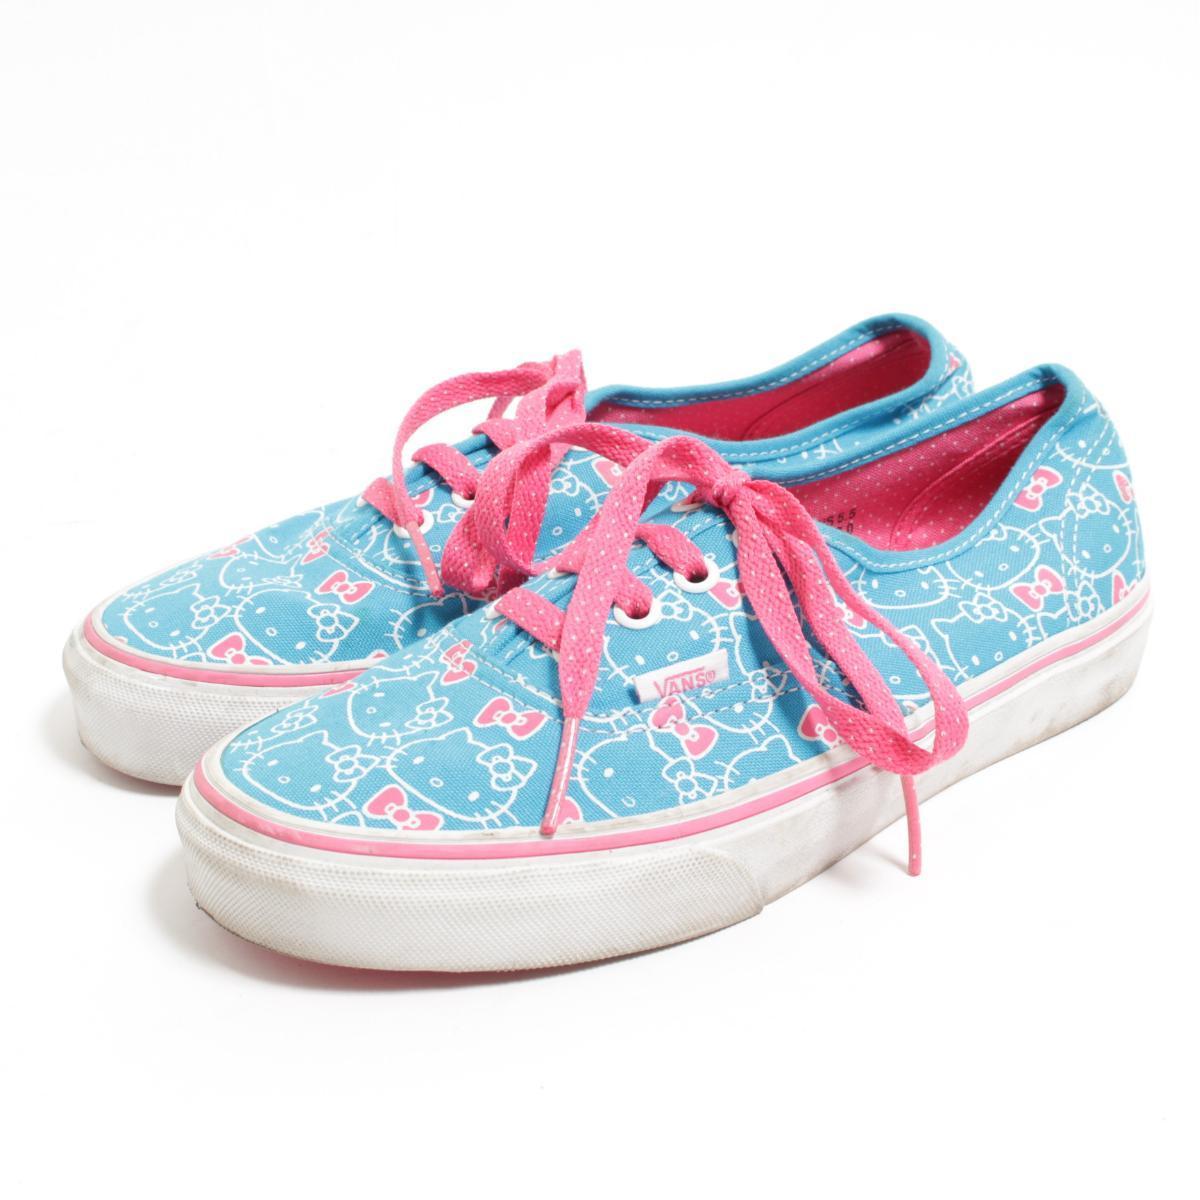 vans shoes hello kitty